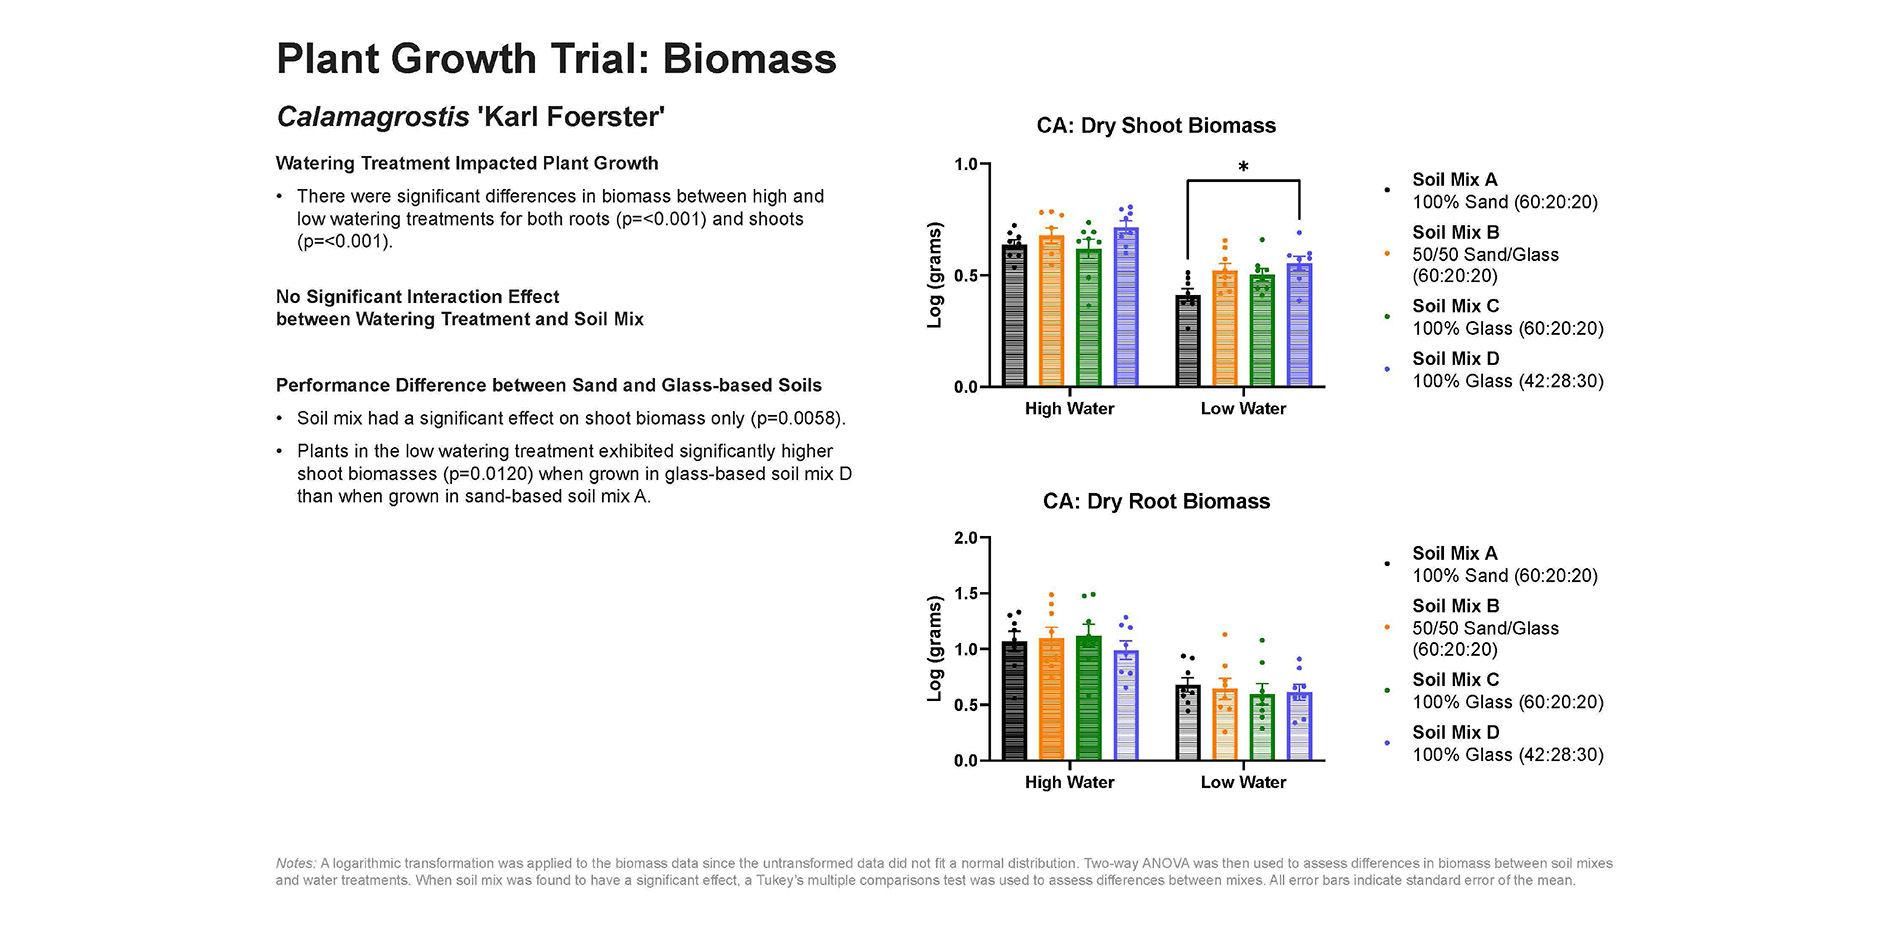 Plant Growth Trial: Biomass Results